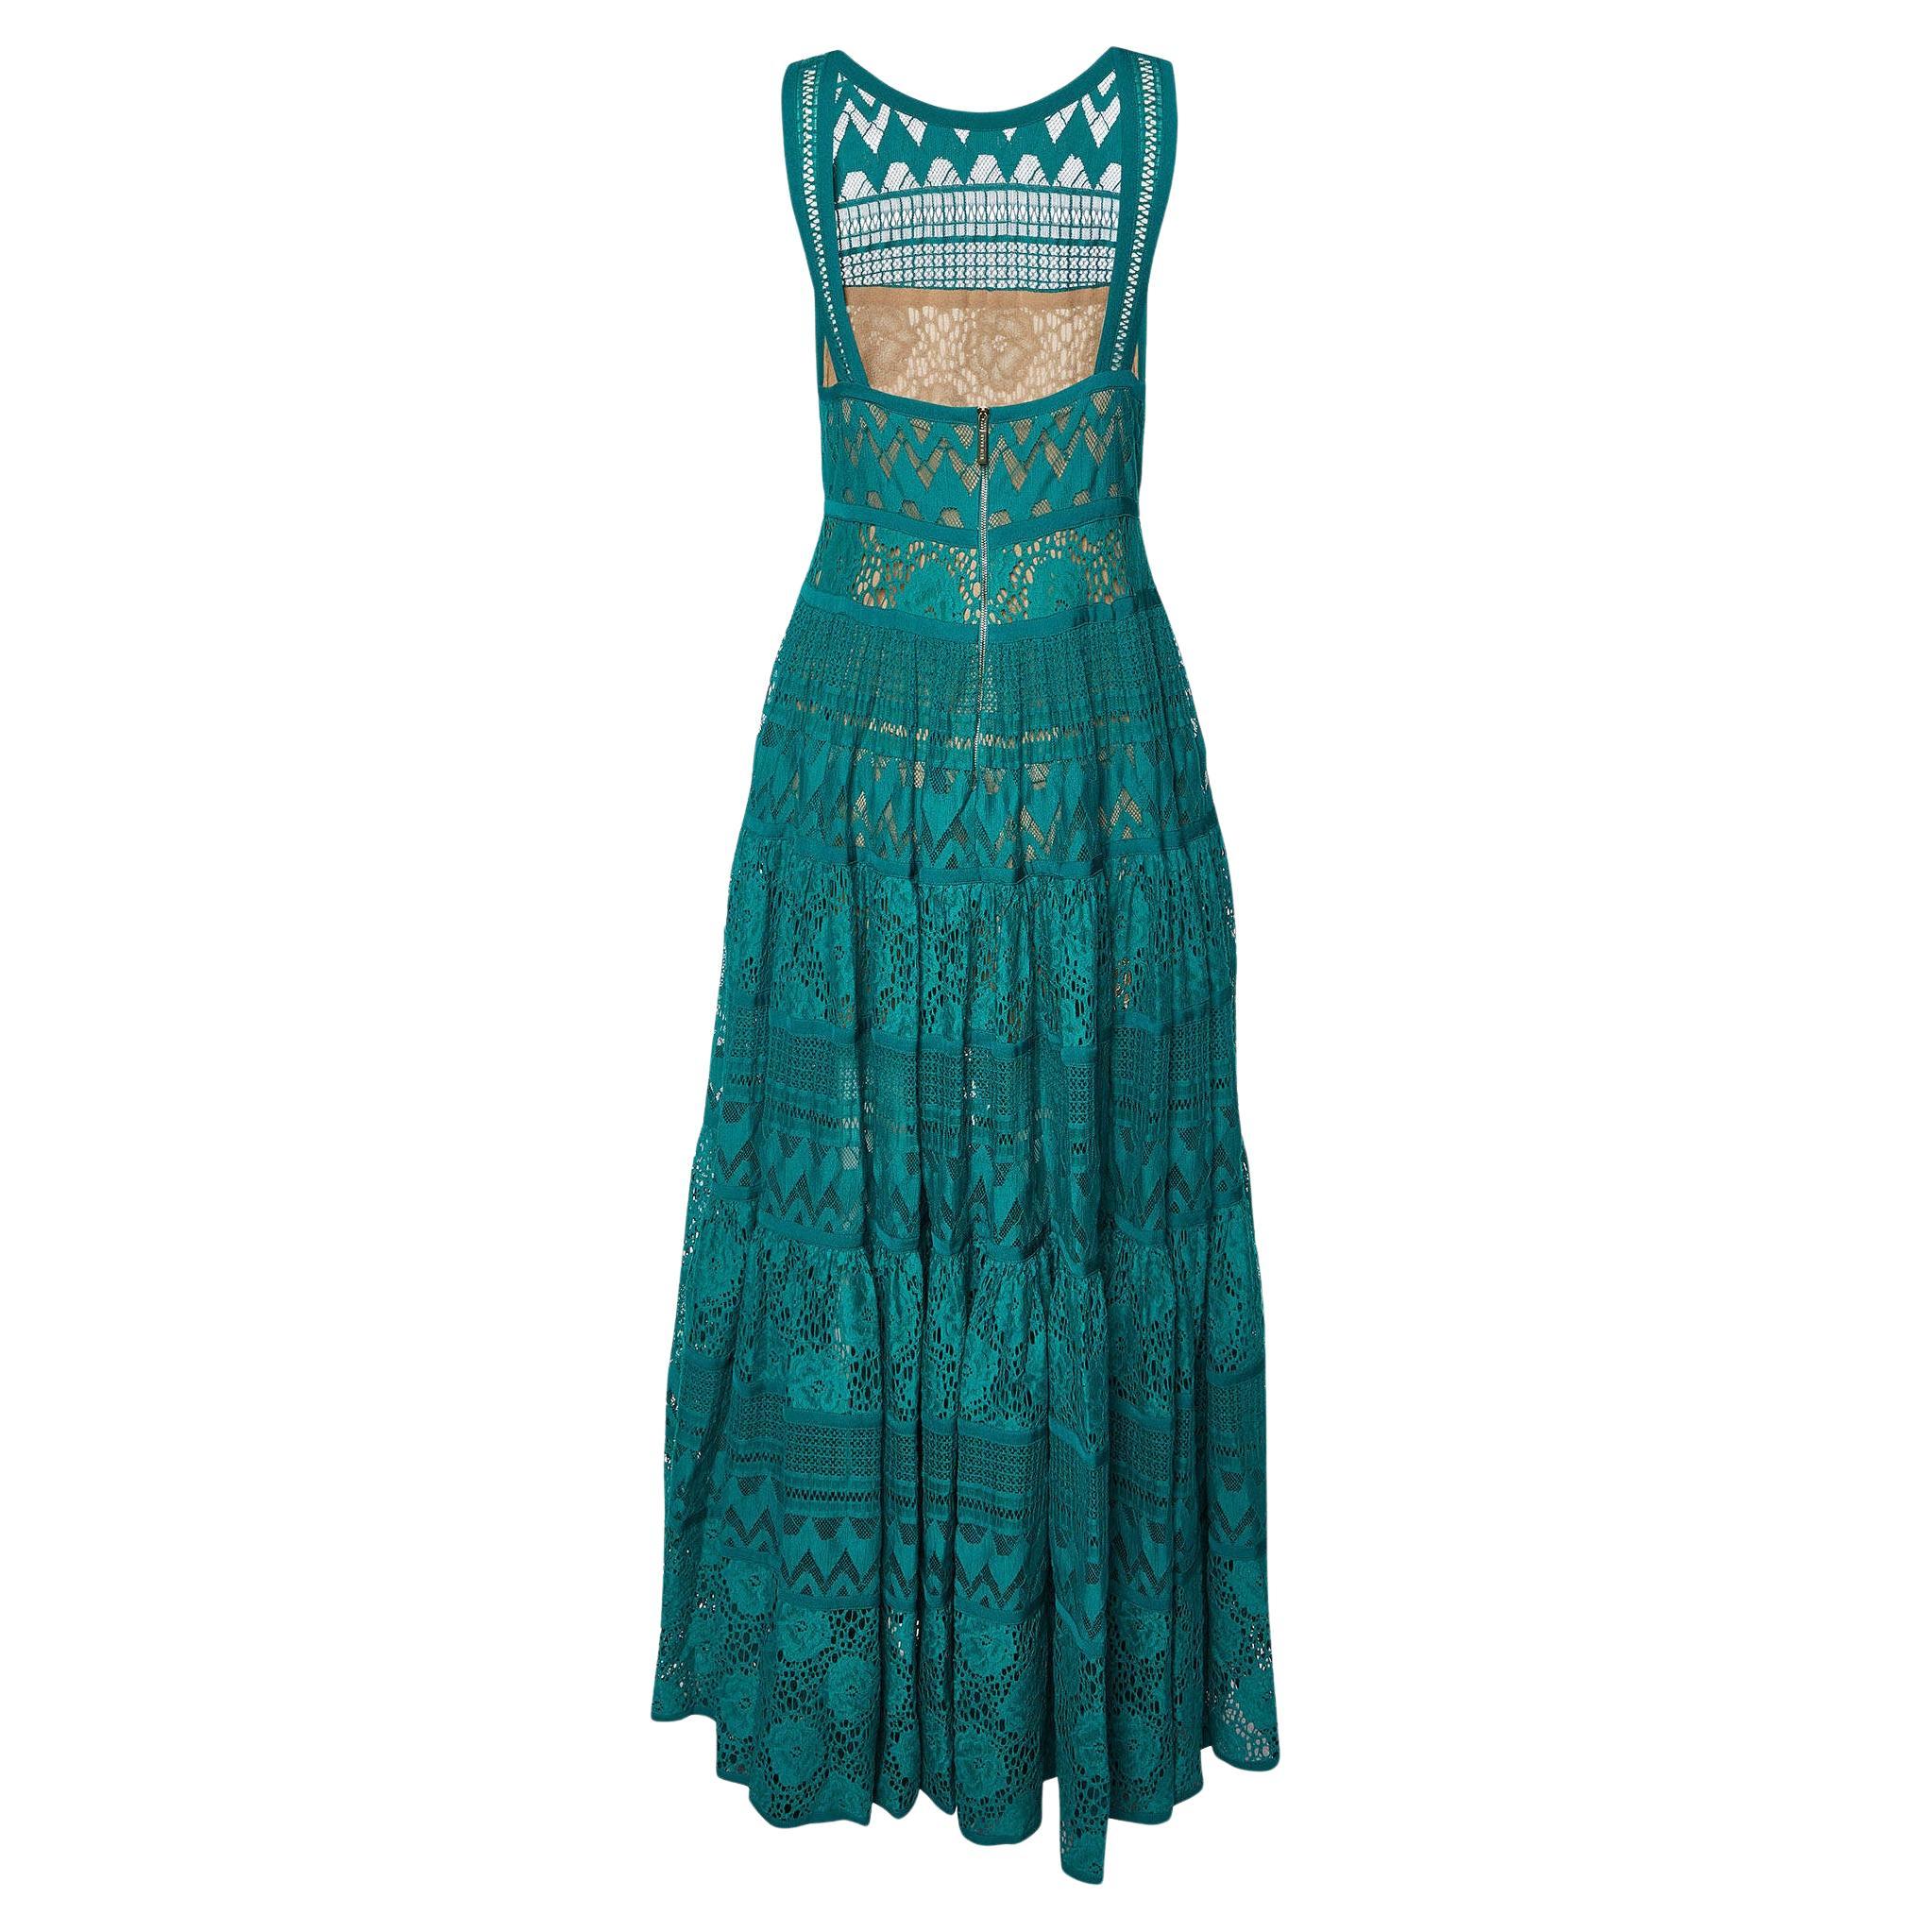 Immerse yourself in the enchanting allure of the Elie Saab dress. Crafted with meticulous attention to detail, this ethereal garment boasts delicate lacework that gracefully adorns its sleeveless silhouette. Its verdant hue evokes a sense of natural